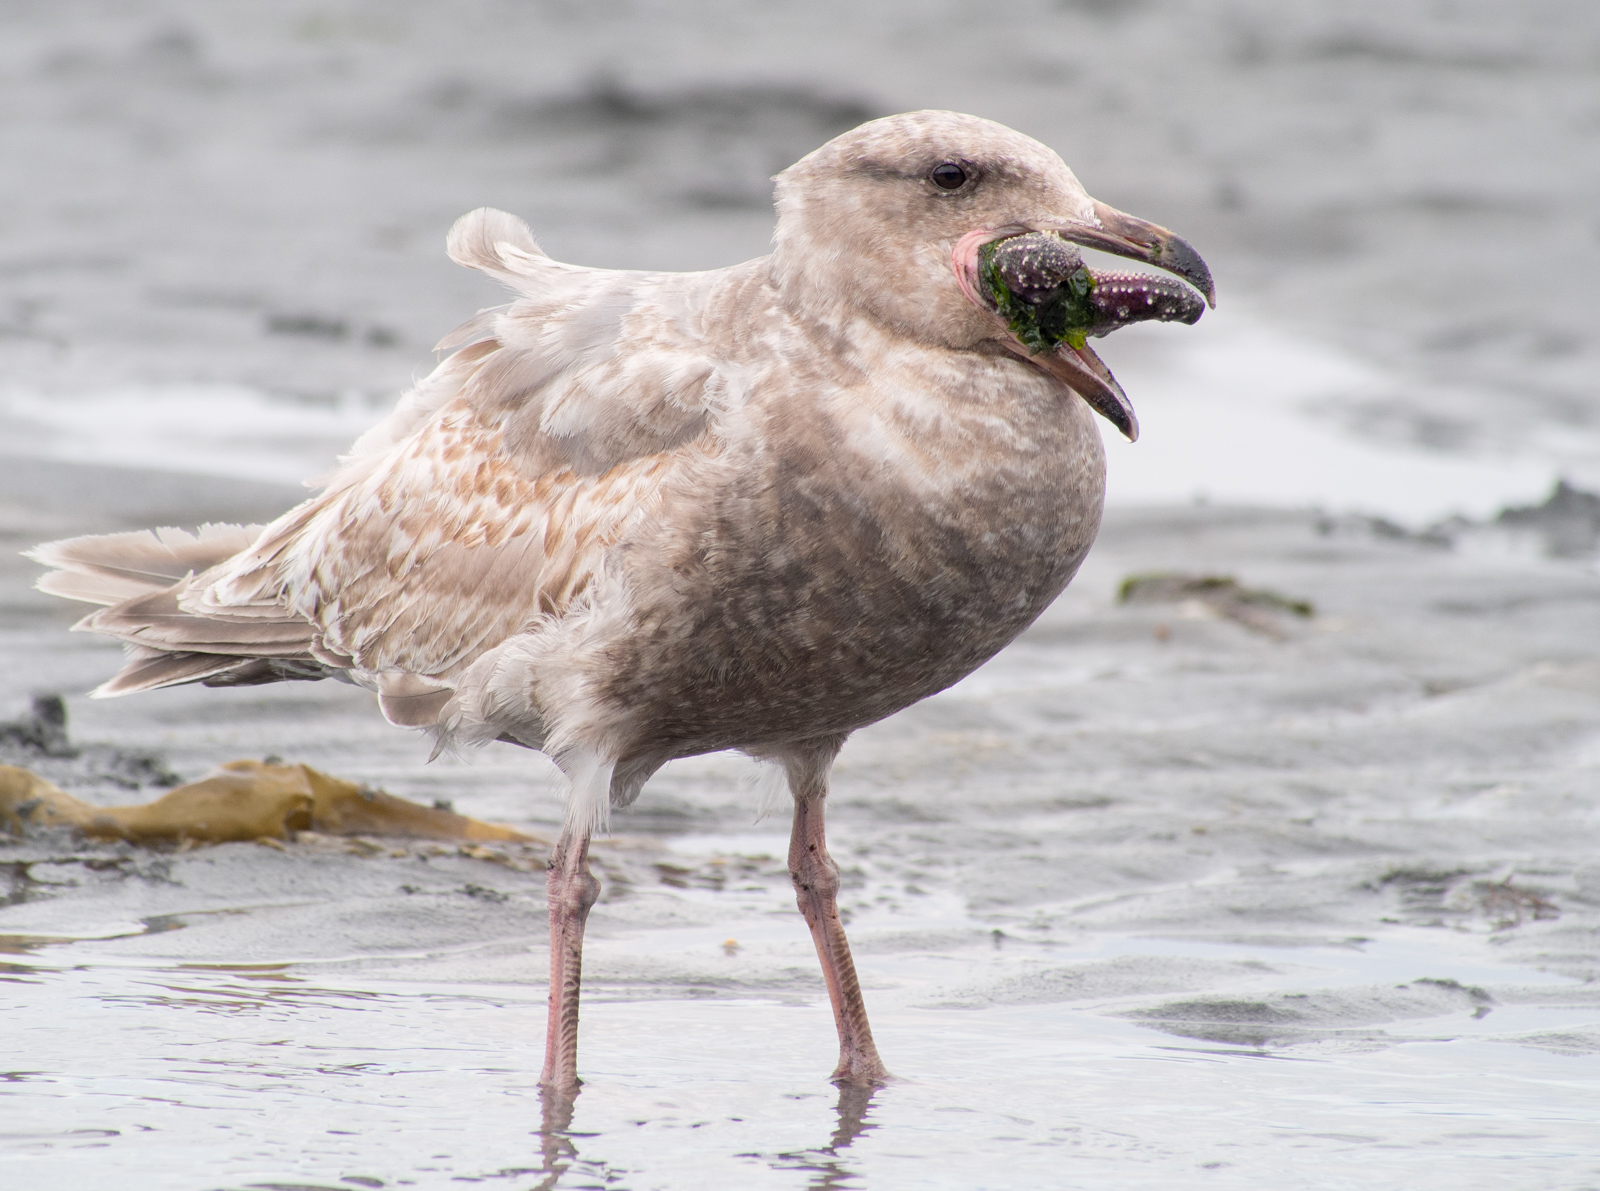 Gull Eating Sea Star on Puget Sound